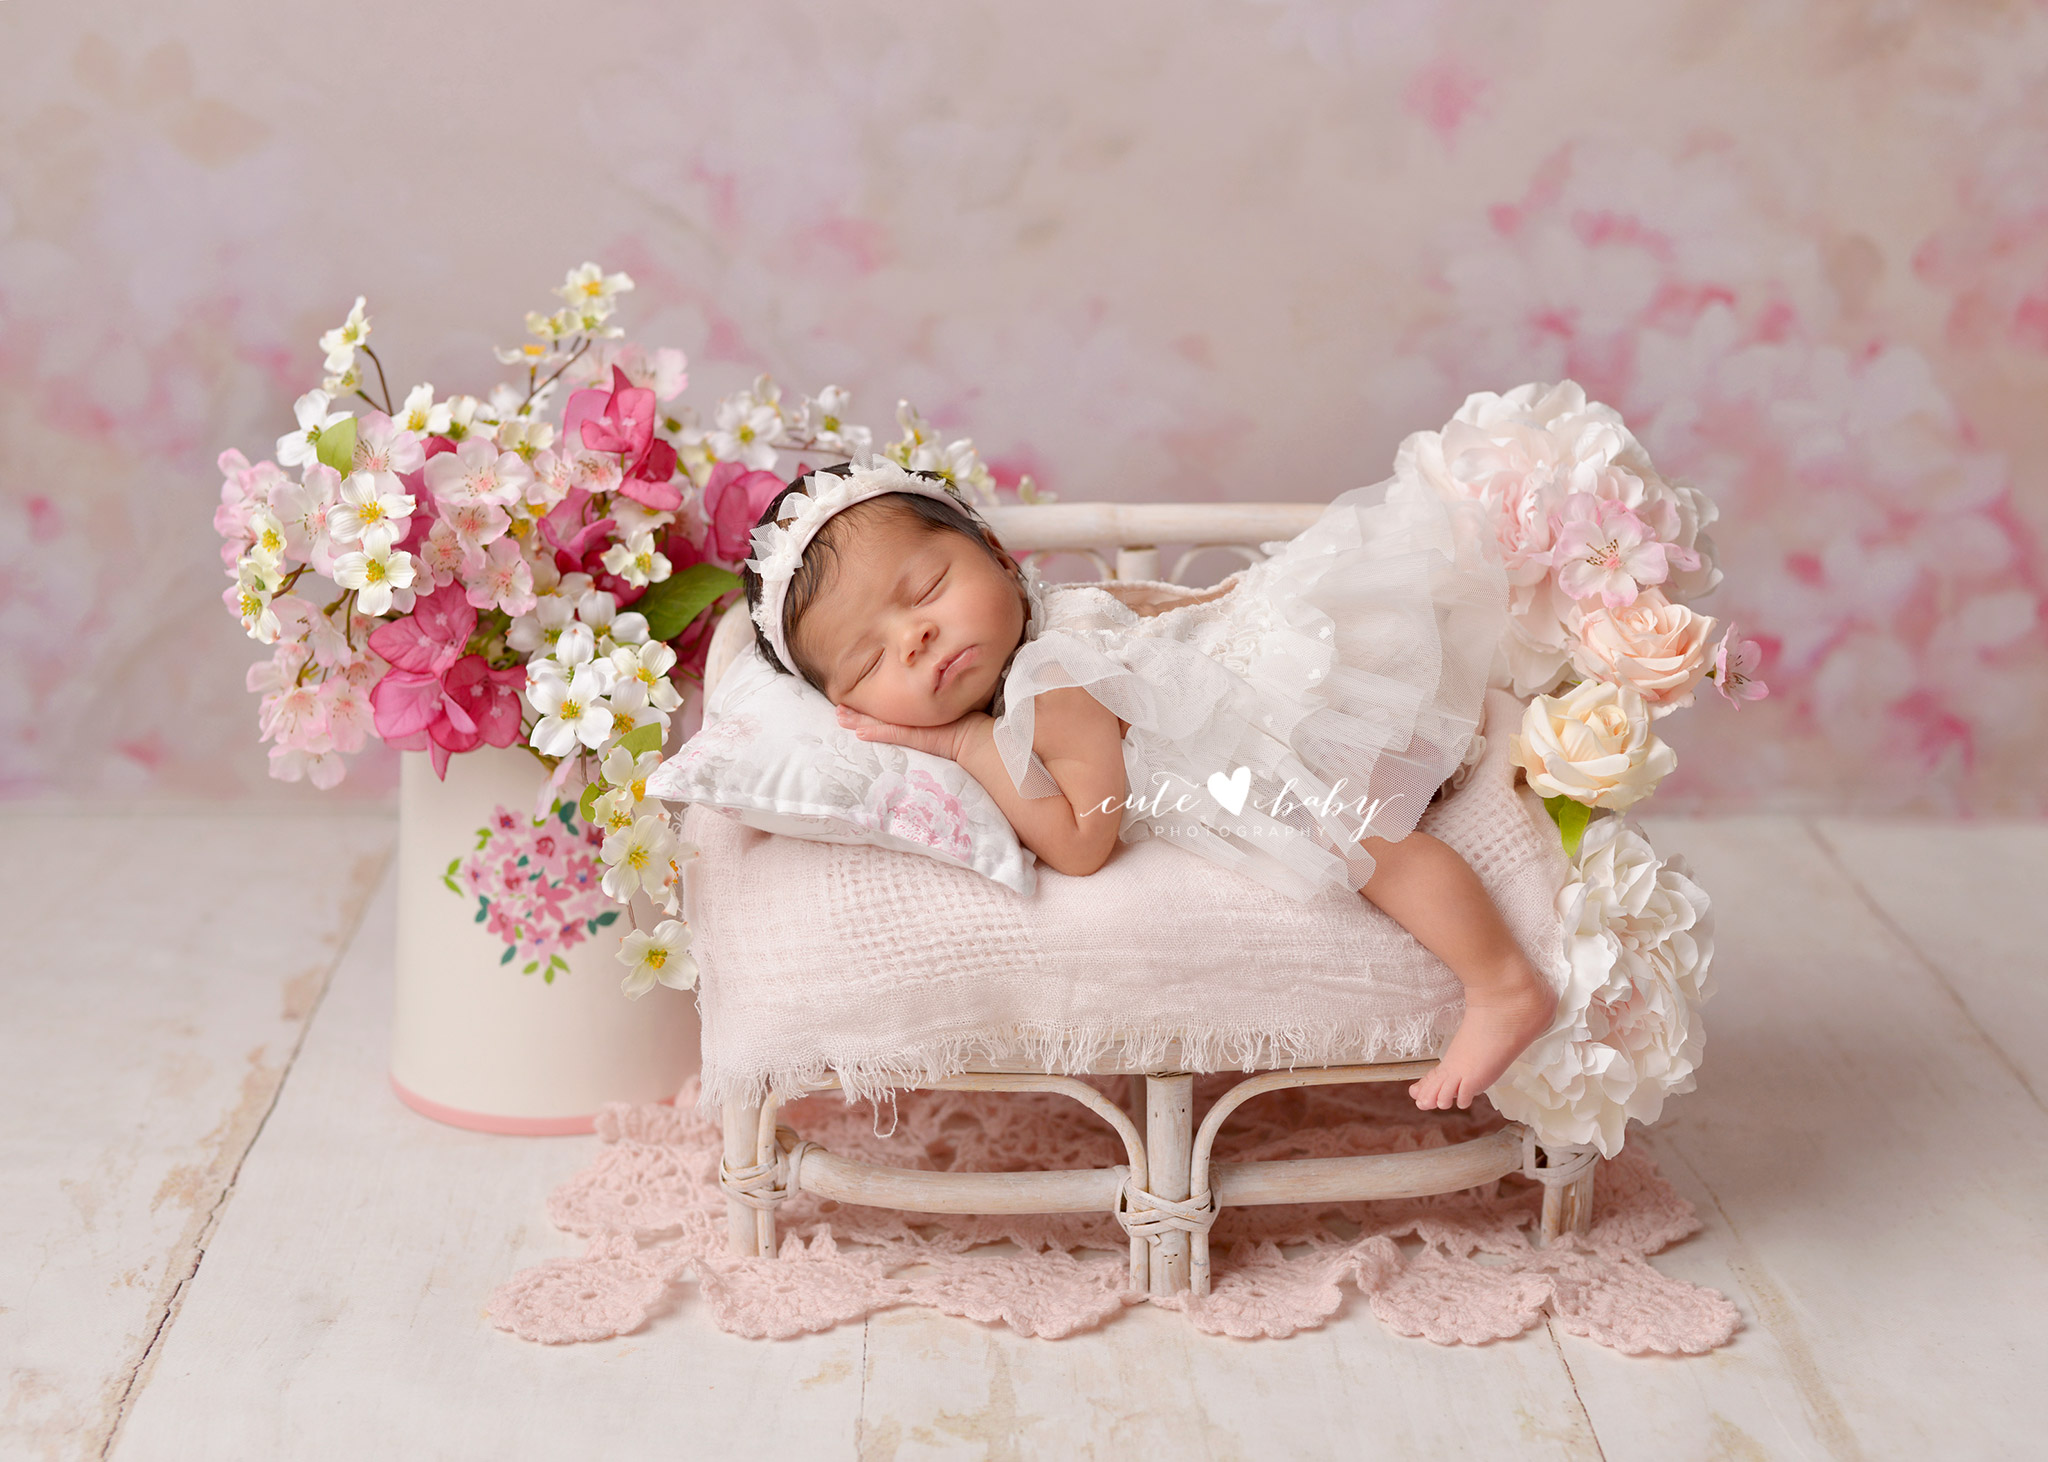 Newborn Photography Manchester by Cute Baby Photography, Studio Newborn photography, Baby Photography, Newborn Session Manchester